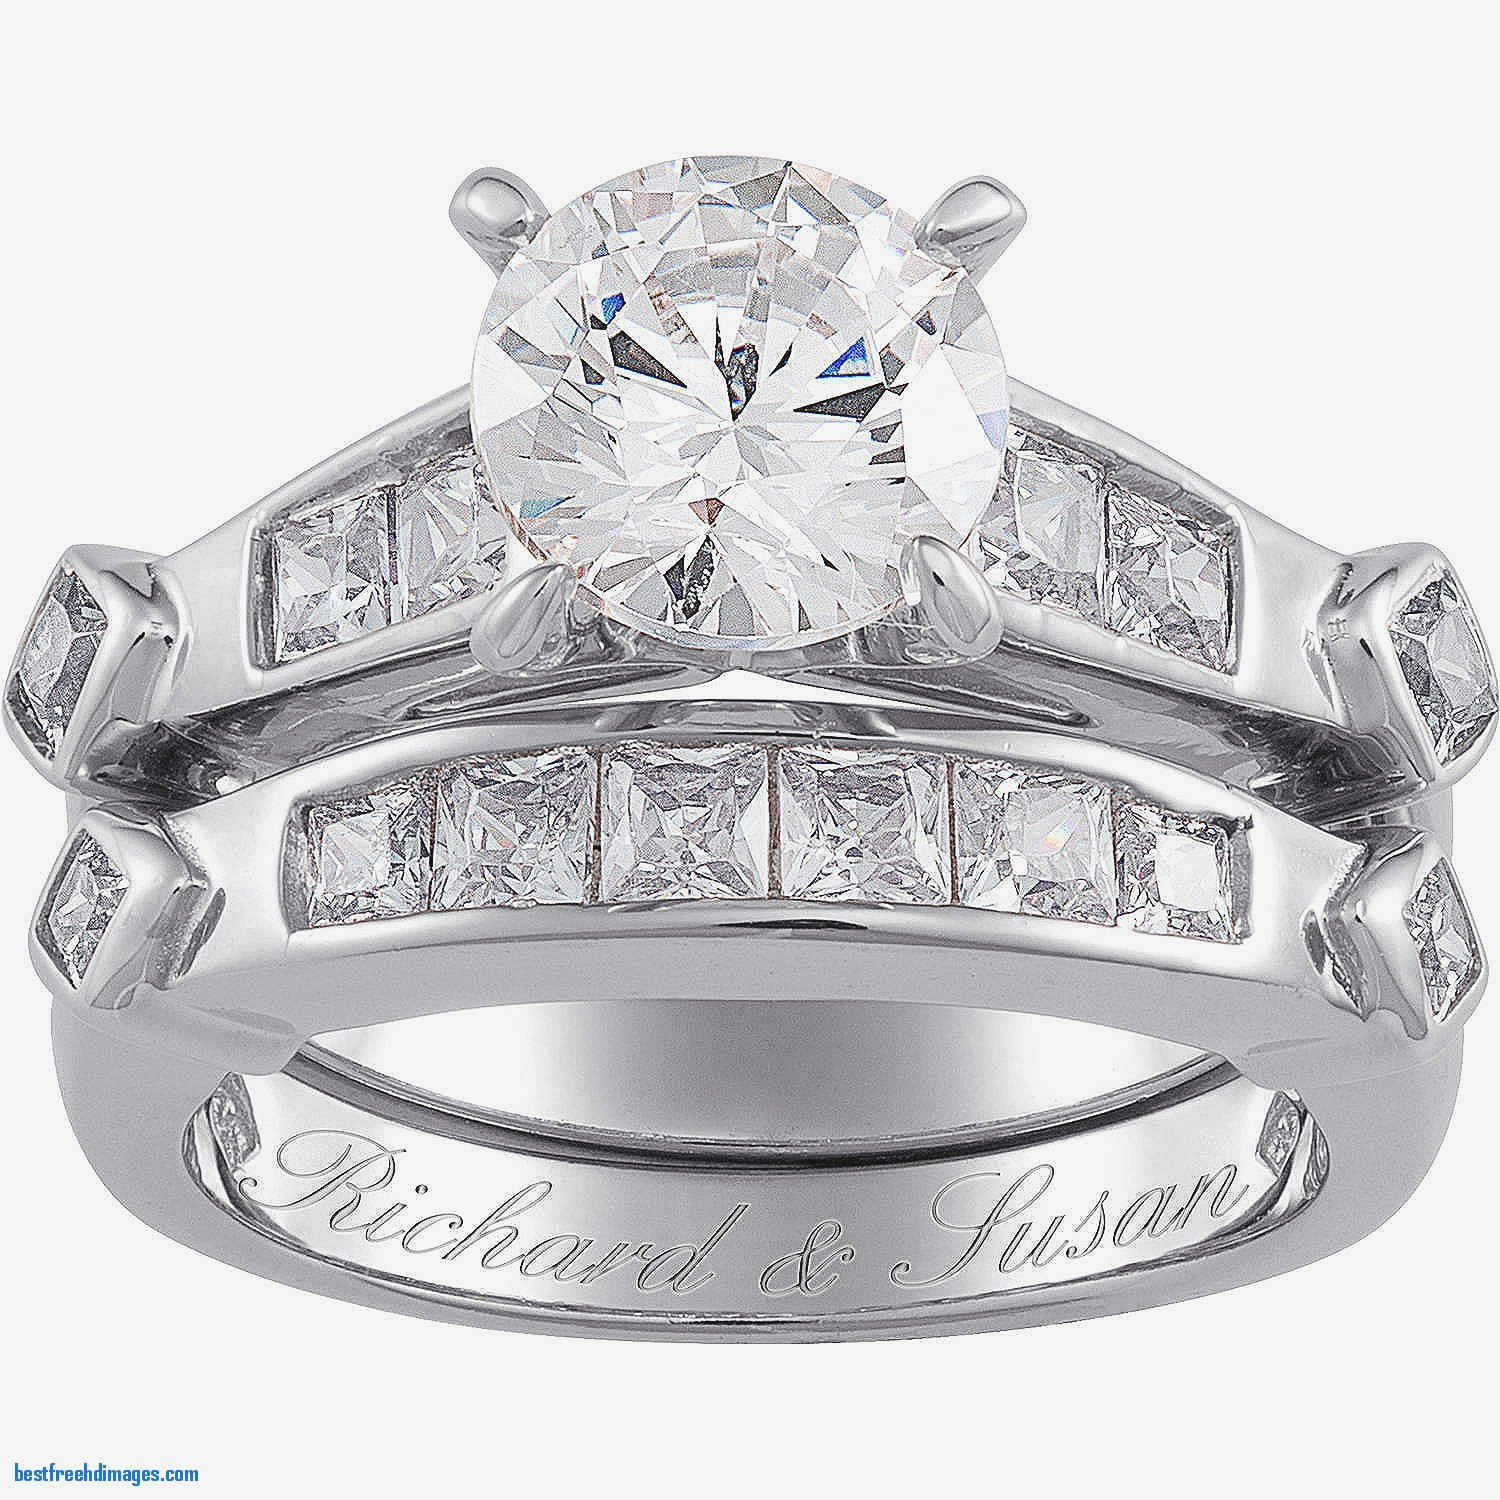 Cheap Wedding Rings Sets For Him And Her
 42 Best Cheap Wedding Ring Sets For Him And Her White